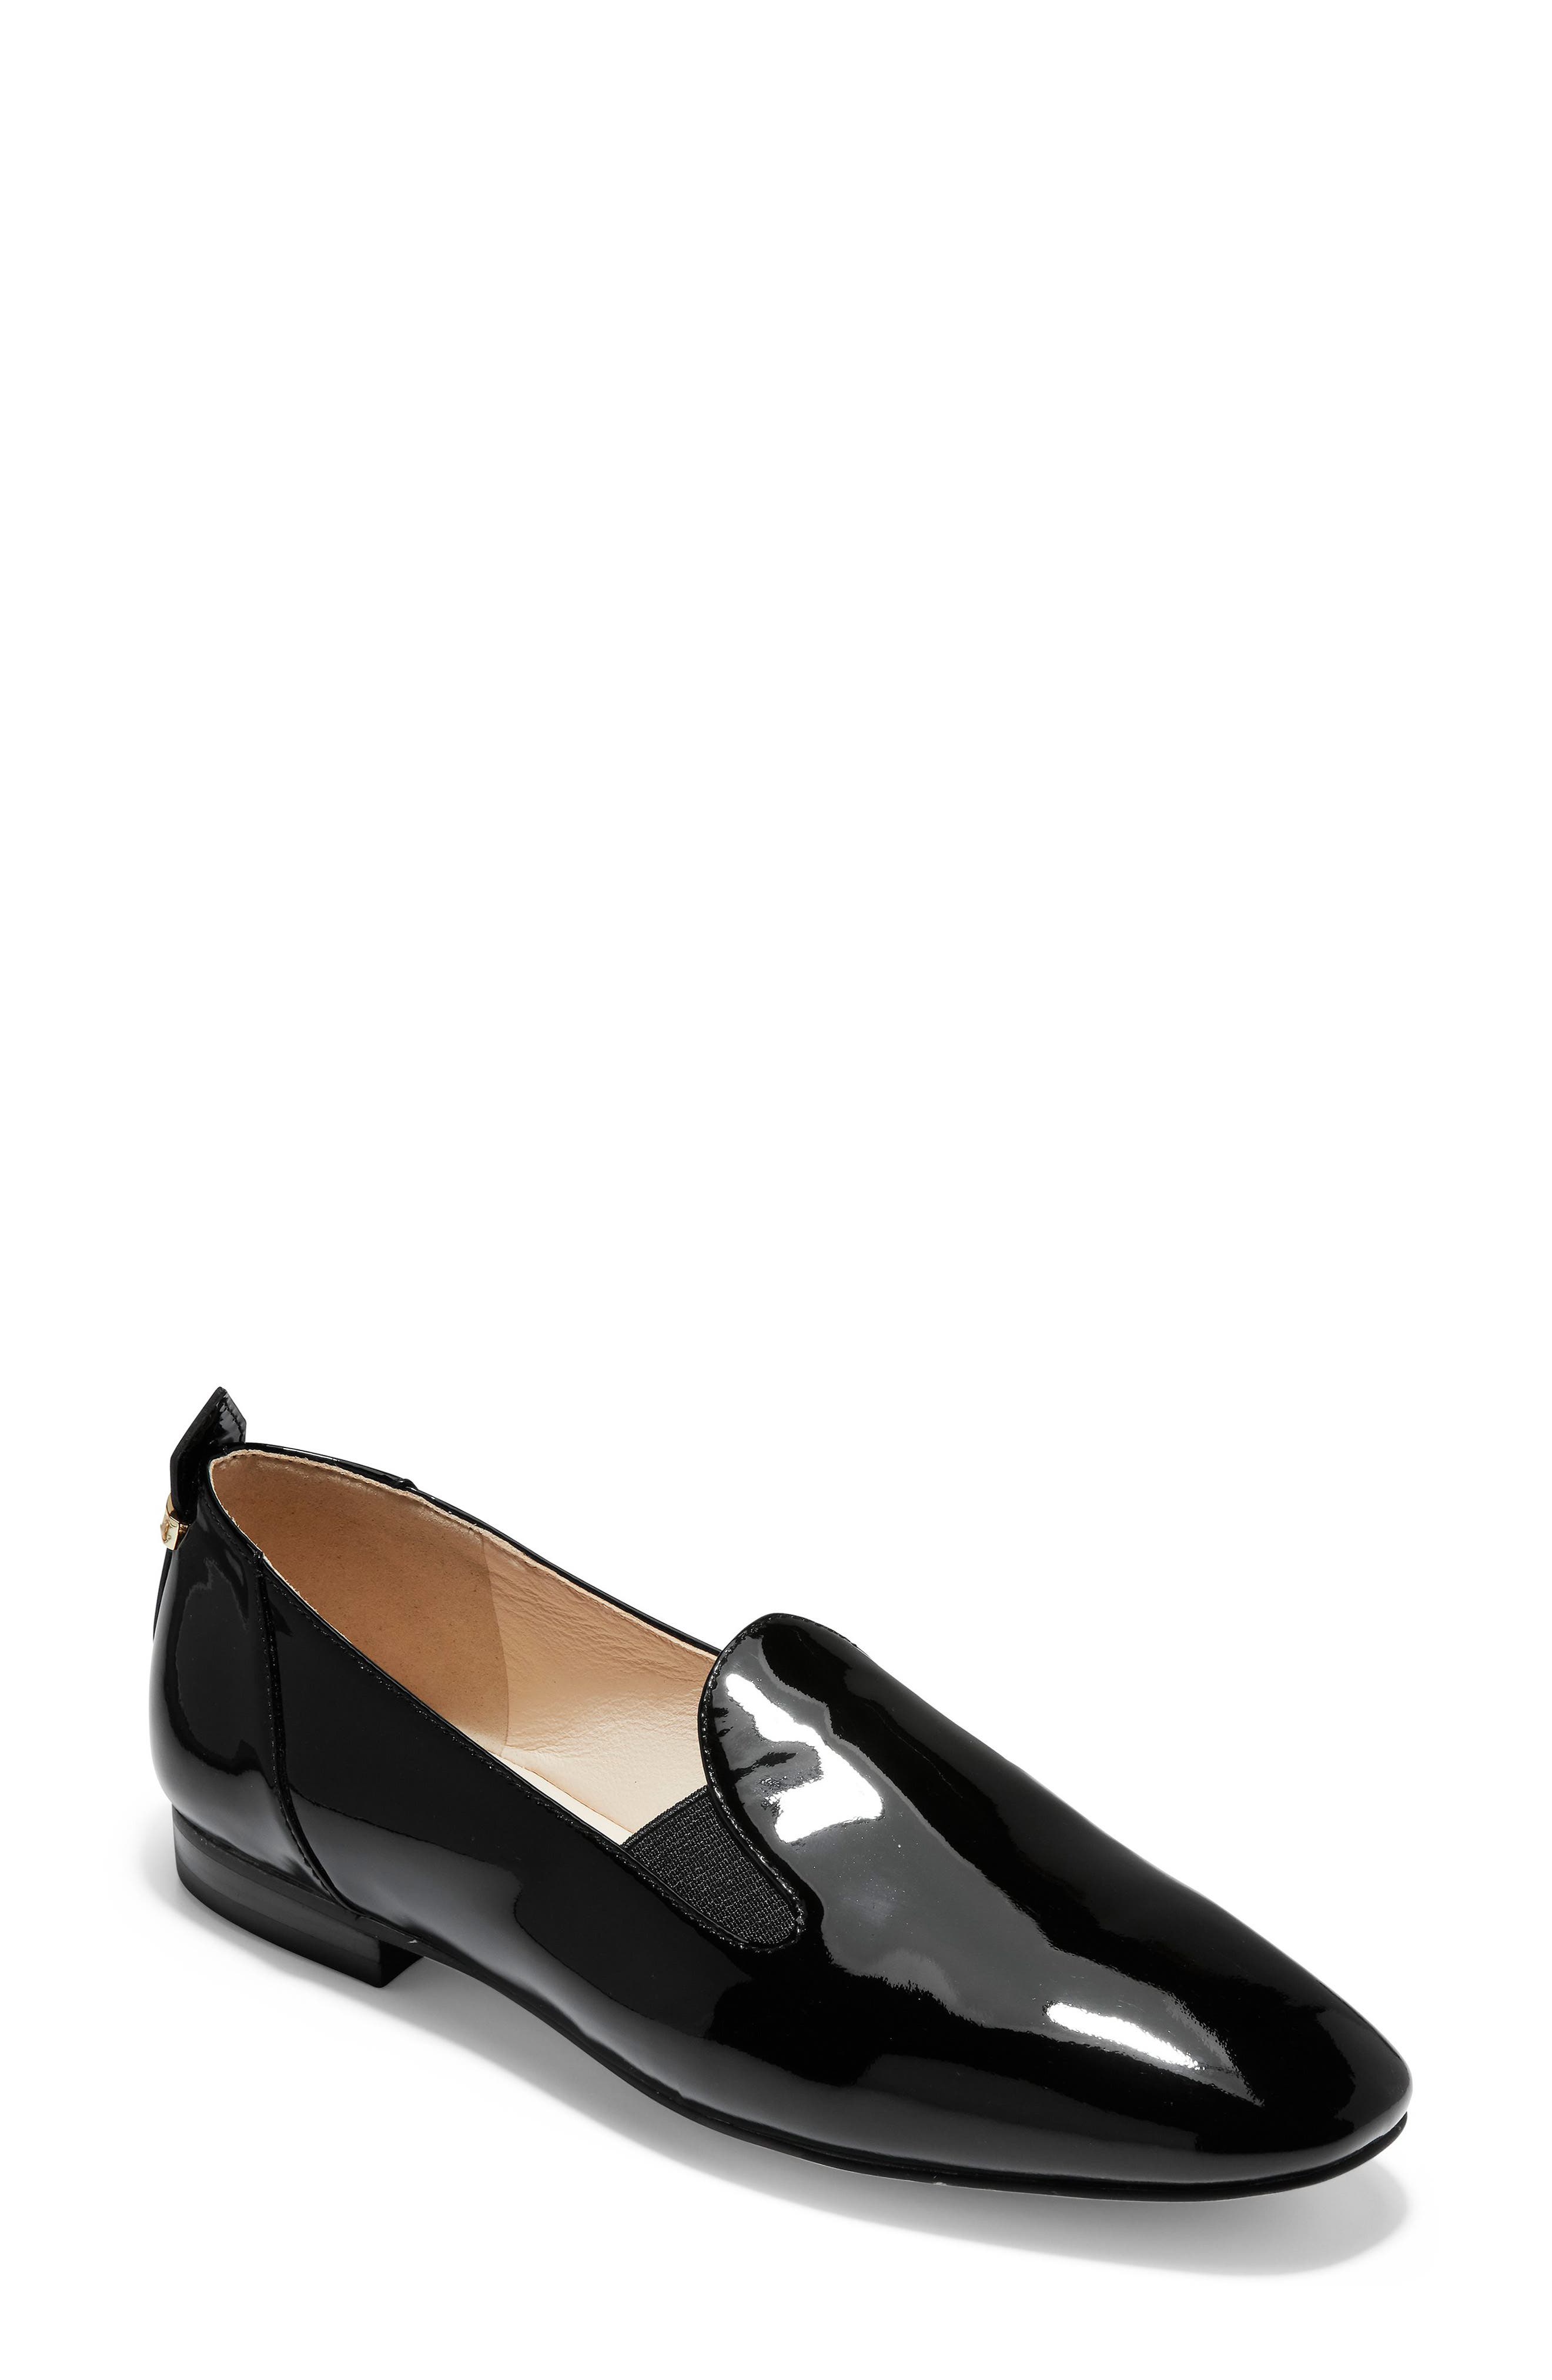 cole haan loafers nordstrom